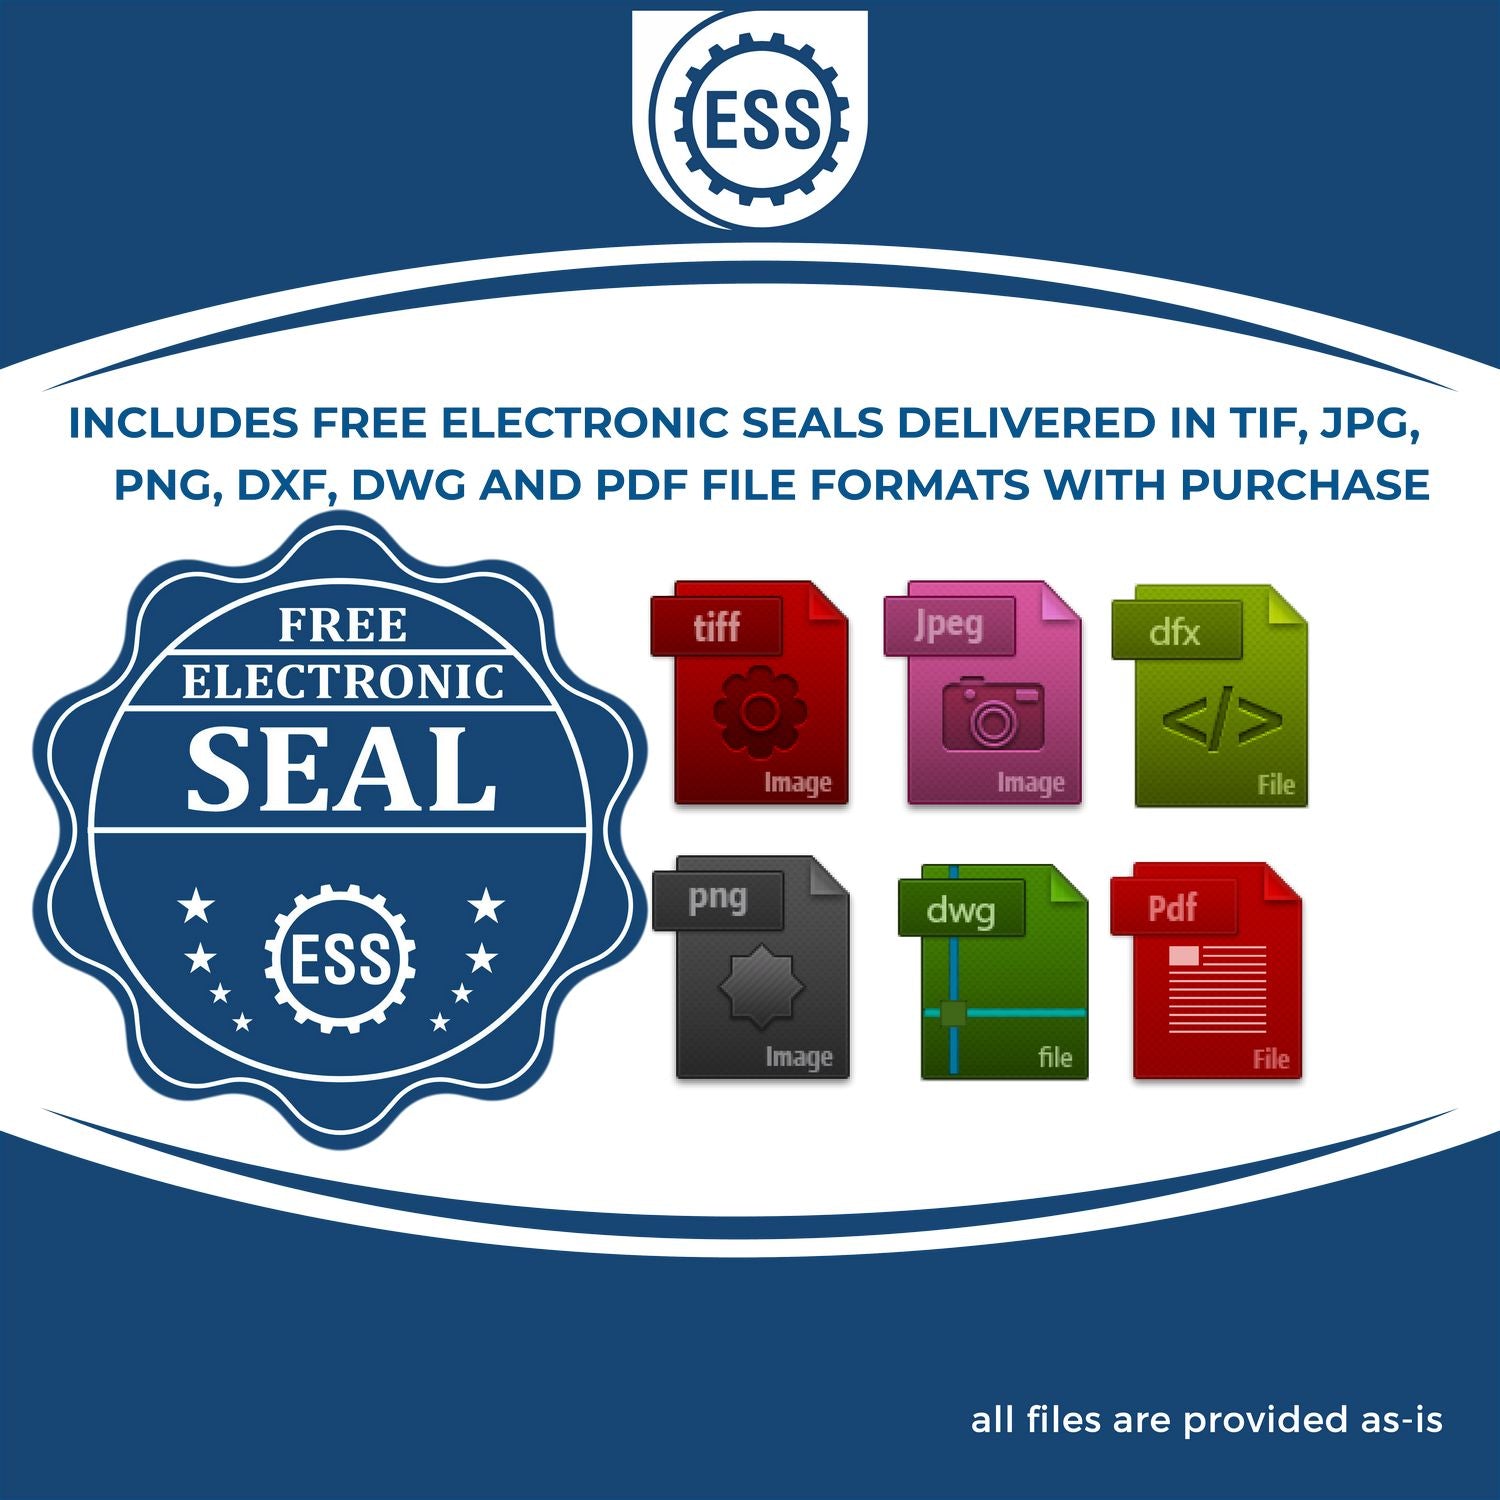 An infographic for the free electronic seal for the Gift Arkansas Architect Seal illustrating the different file type icons such as DXF, DWG, TIF, JPG and PNG.